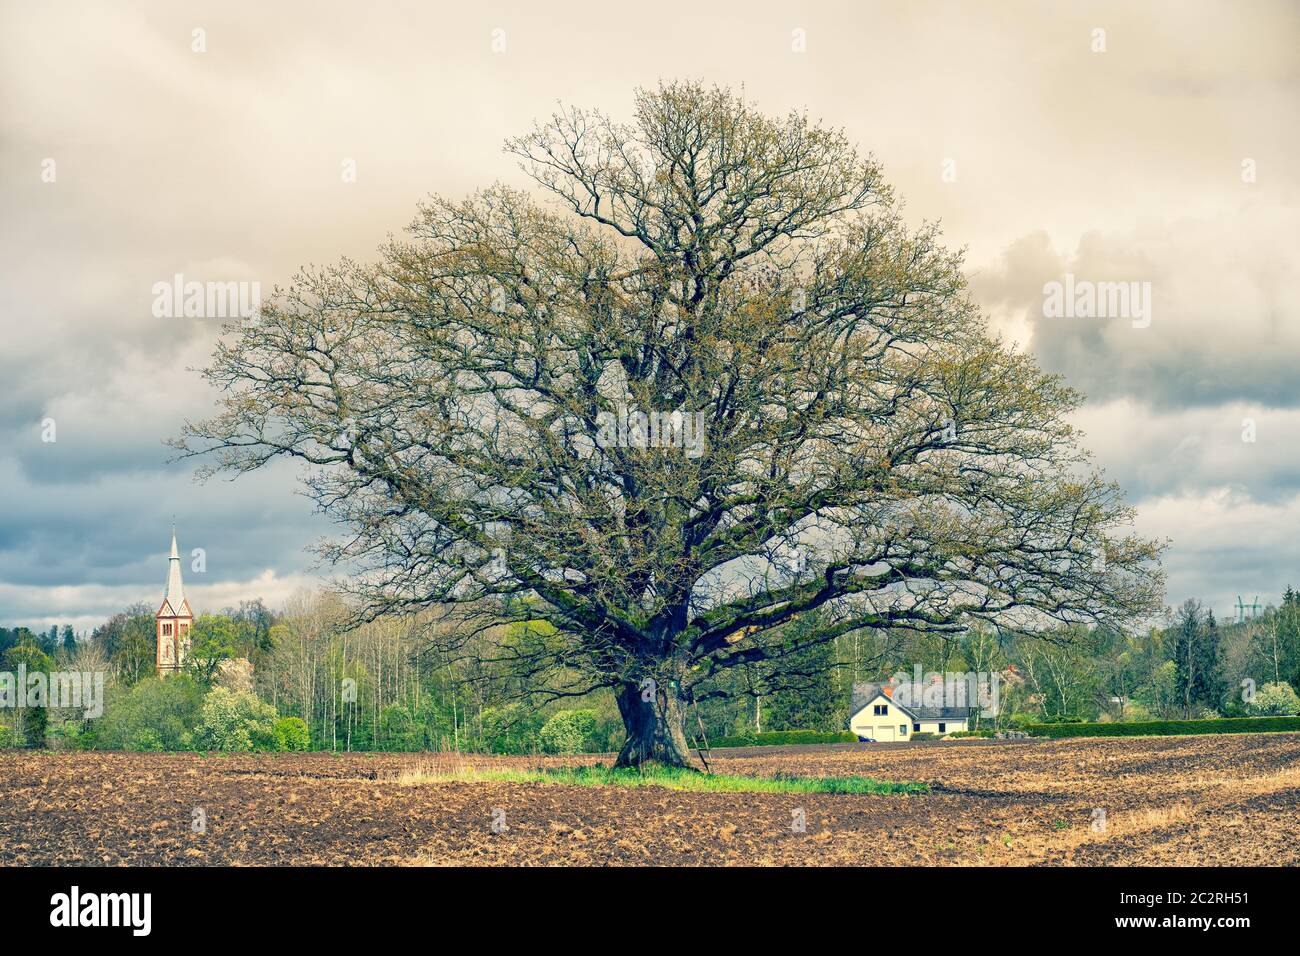 A mighty old oak tree without leaves stands in a plowed field in spring. Against the background of green forest and rural houses. Latvia Stock Photo